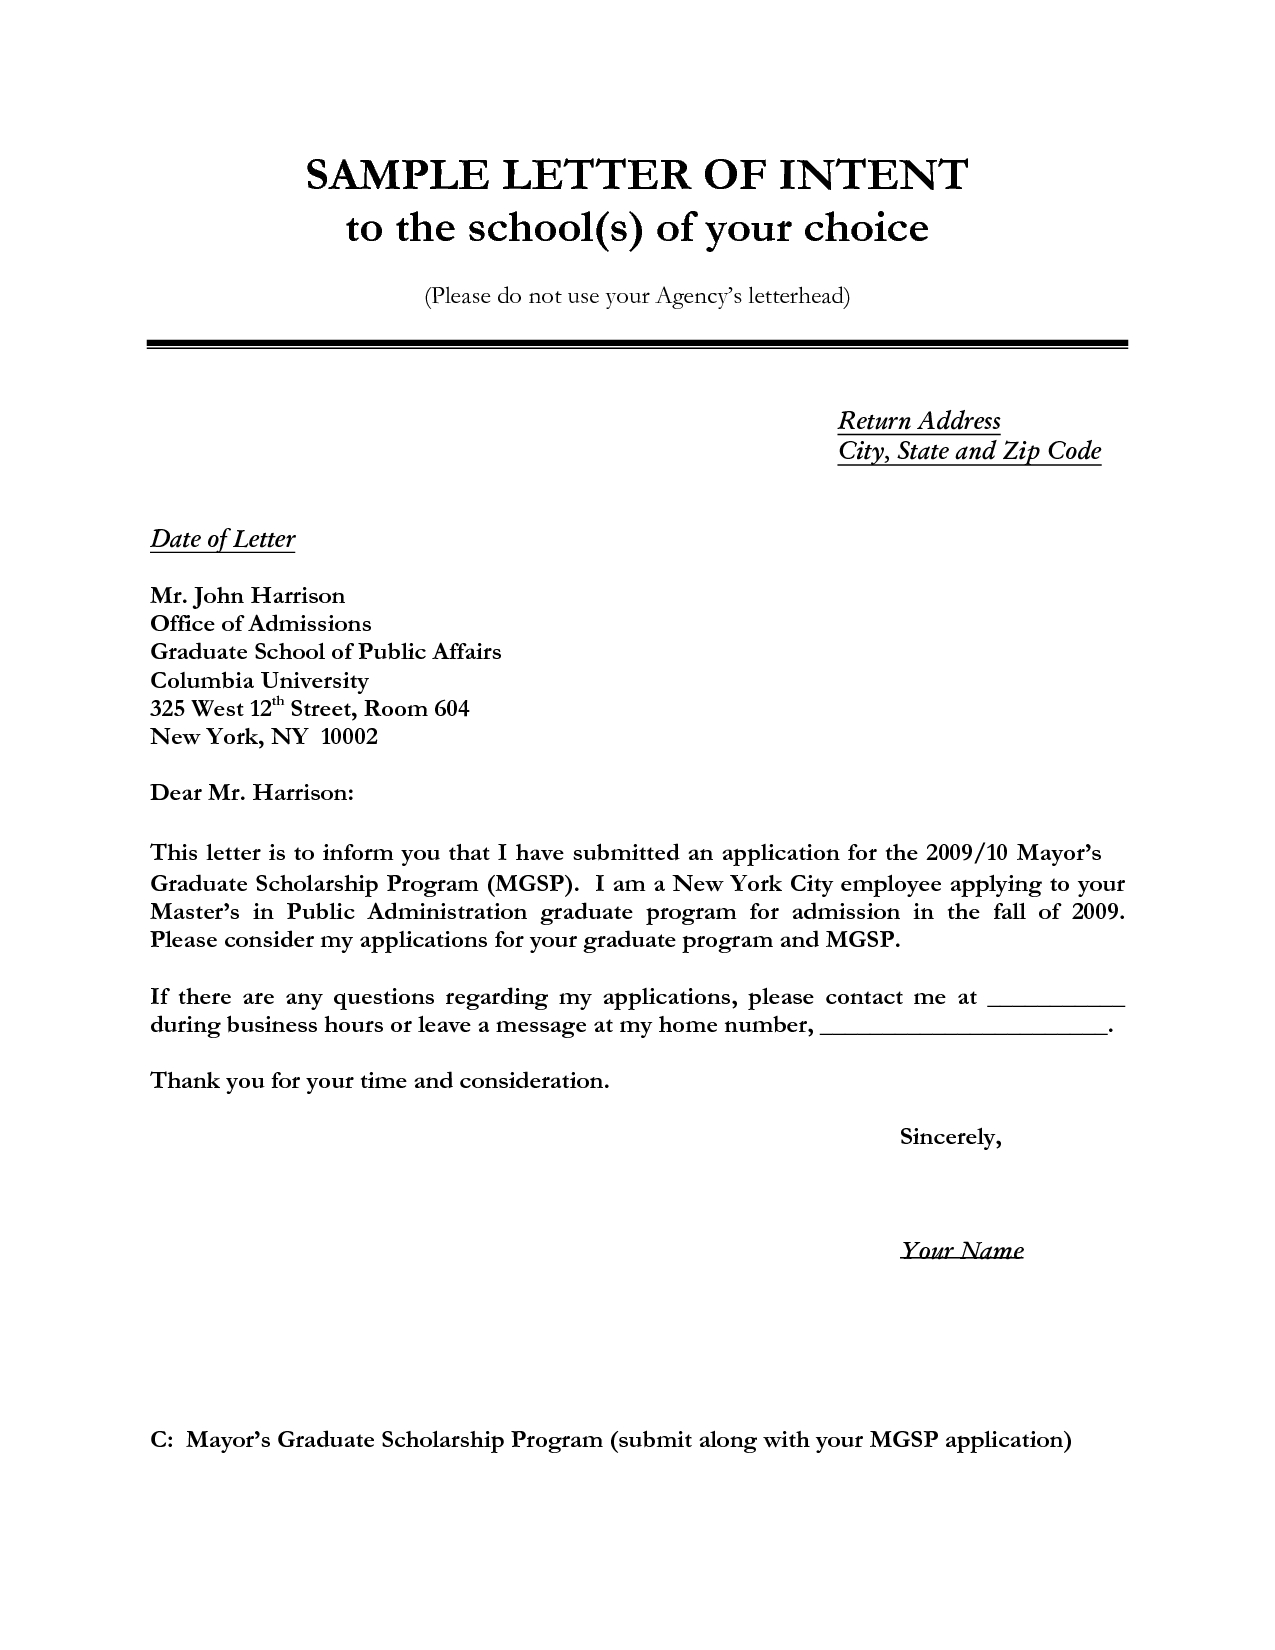 Contract Cancellation Letter Template Free - Letter Of Intent Sample